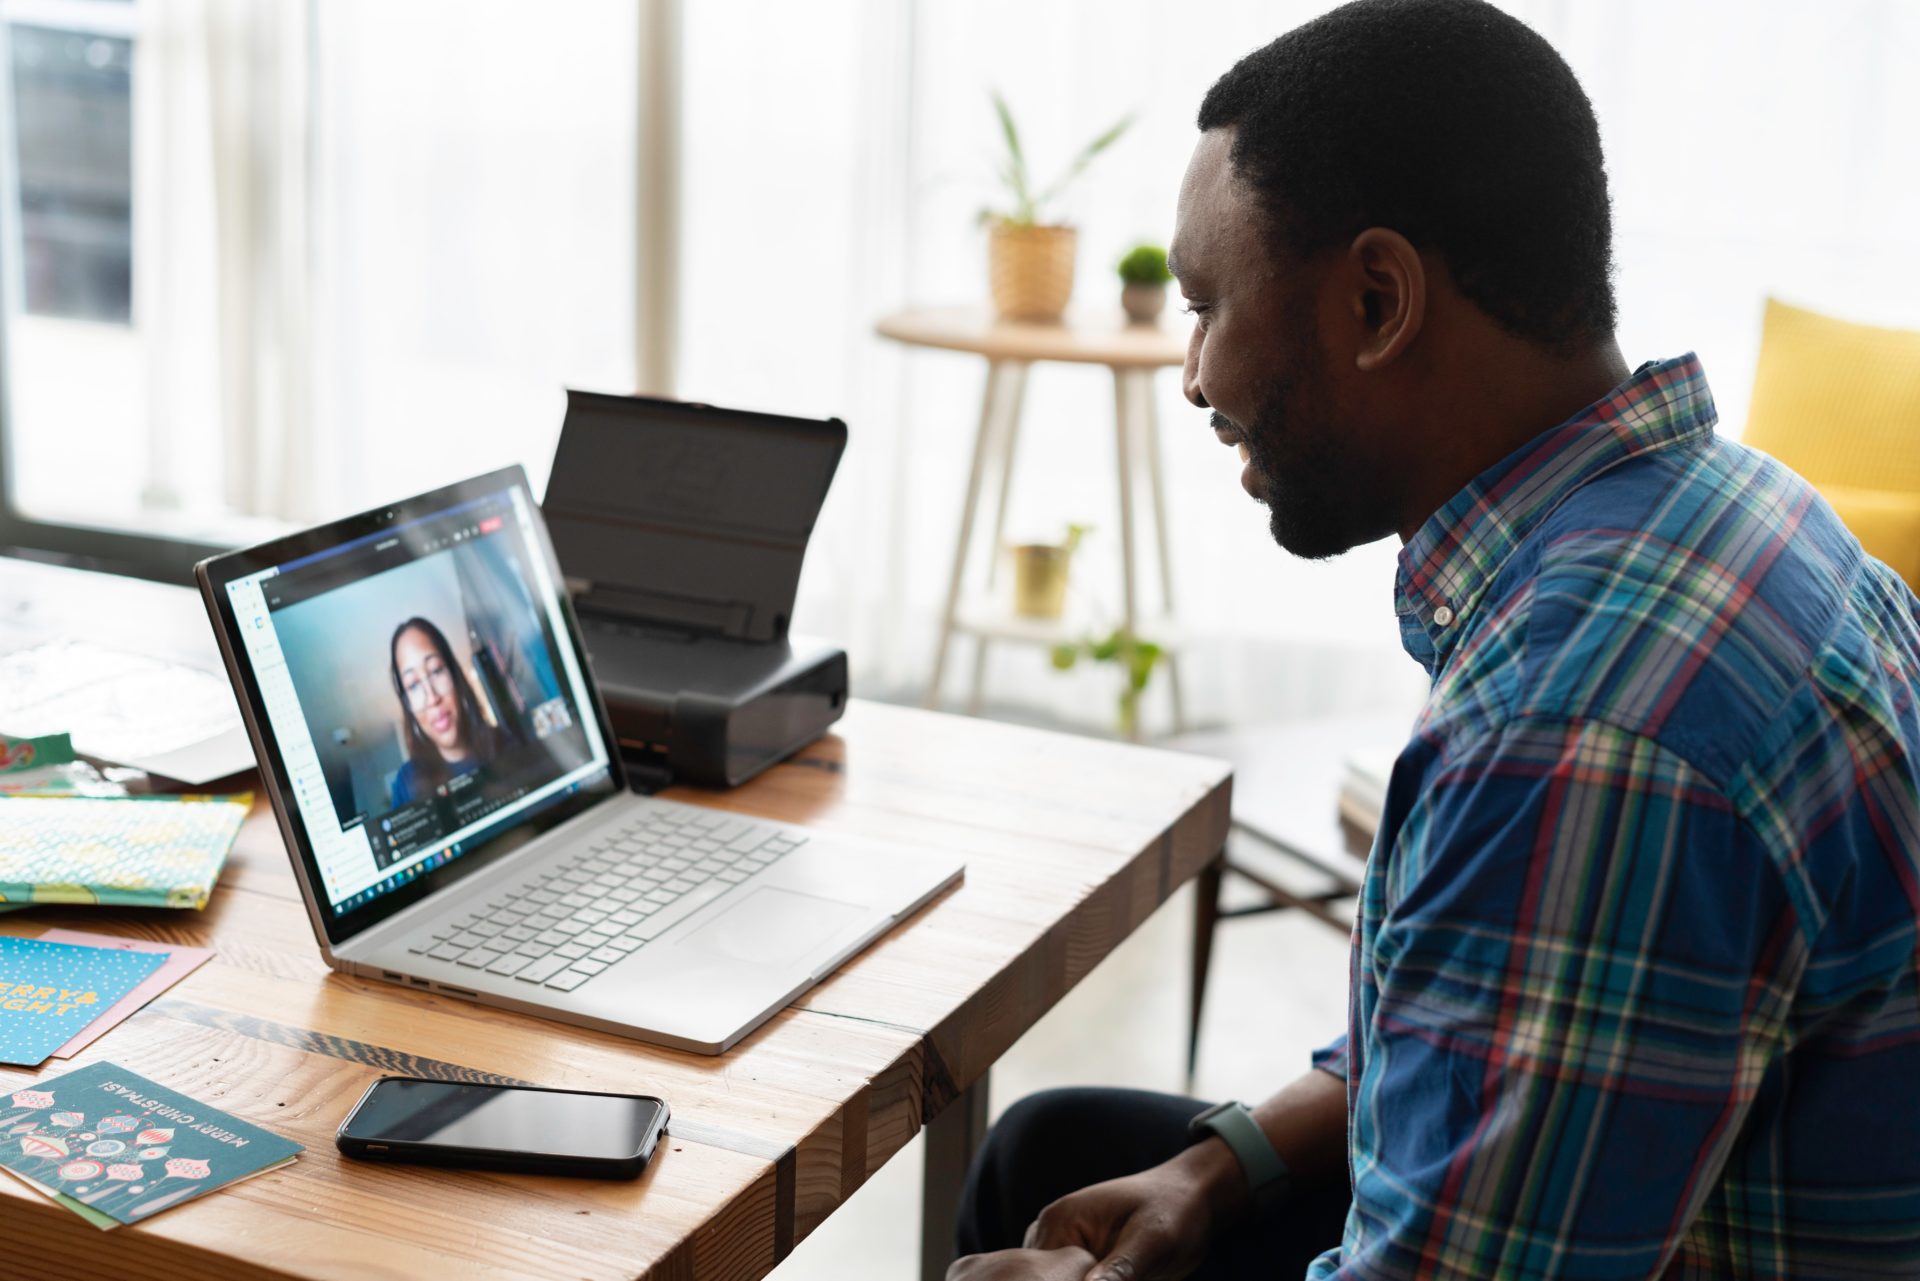 smiling man talking to woman on a video call using a laptop